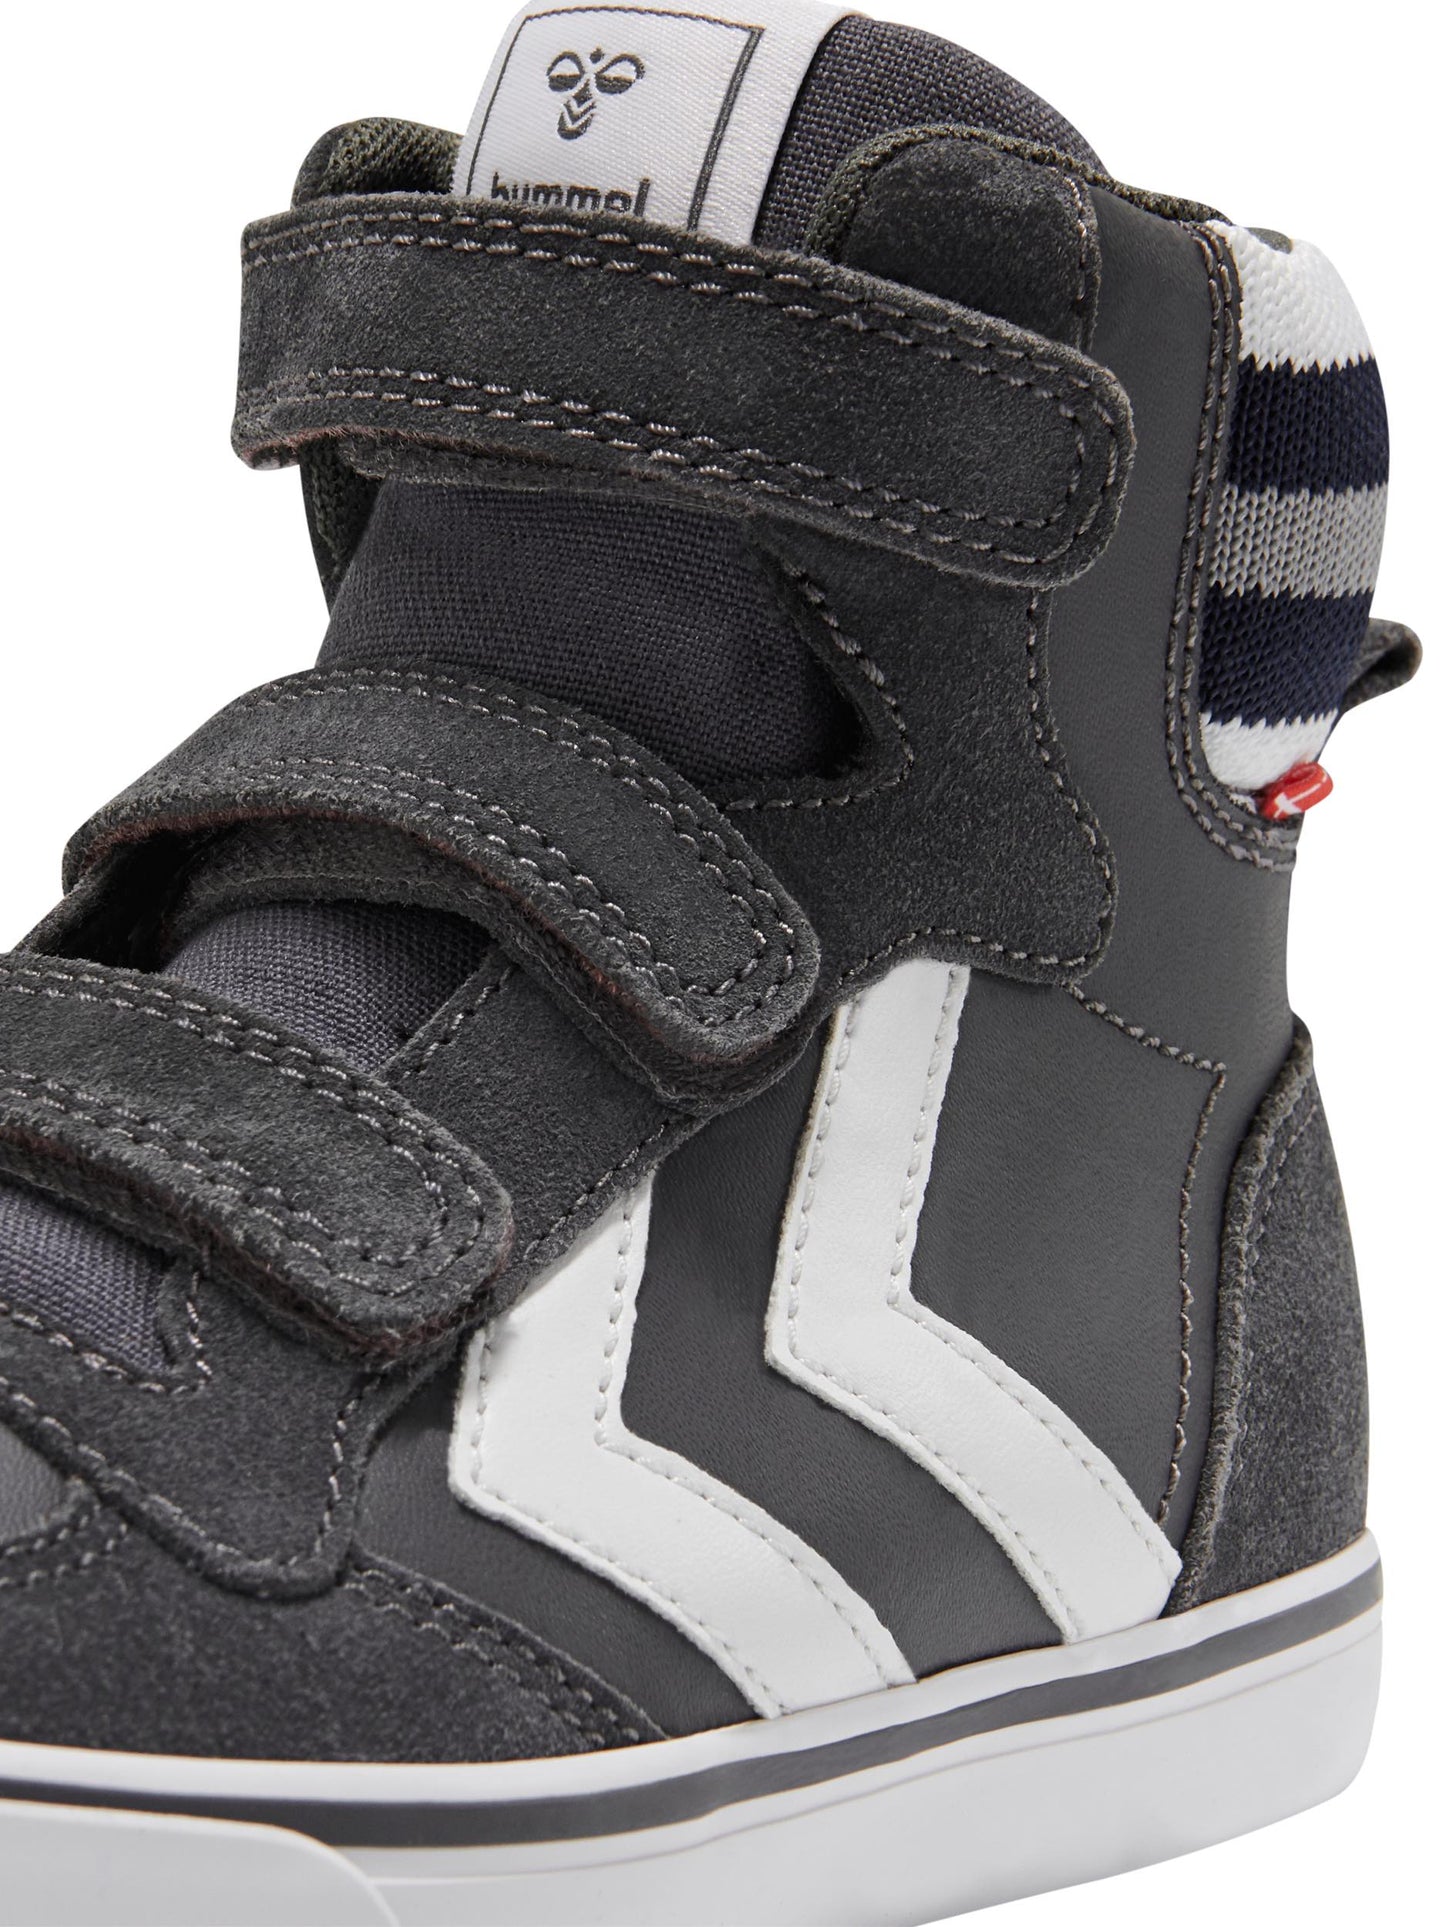 Hummel Stadil Pro Junior Leather and Suede Aaphalt Trainers